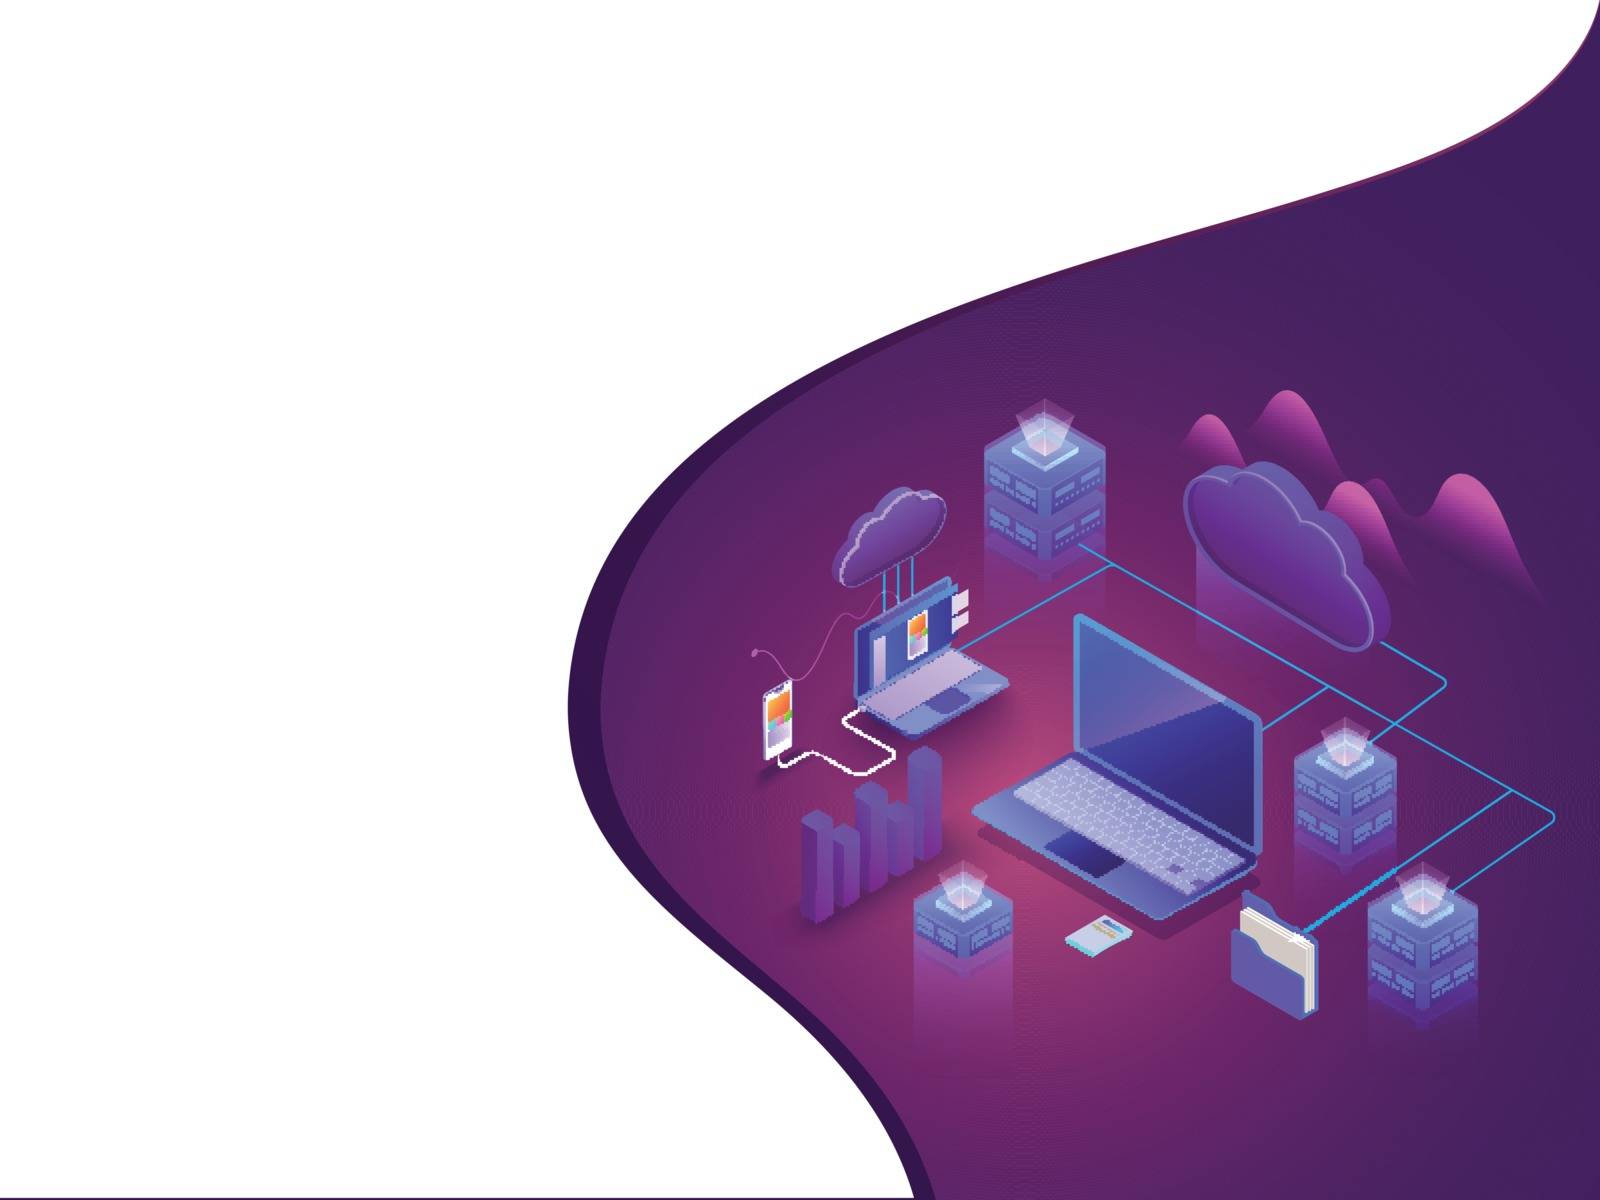 3D illustration of web servers and cloud server connected to laptop with other business elements on purple background for data management concept based isometric design.